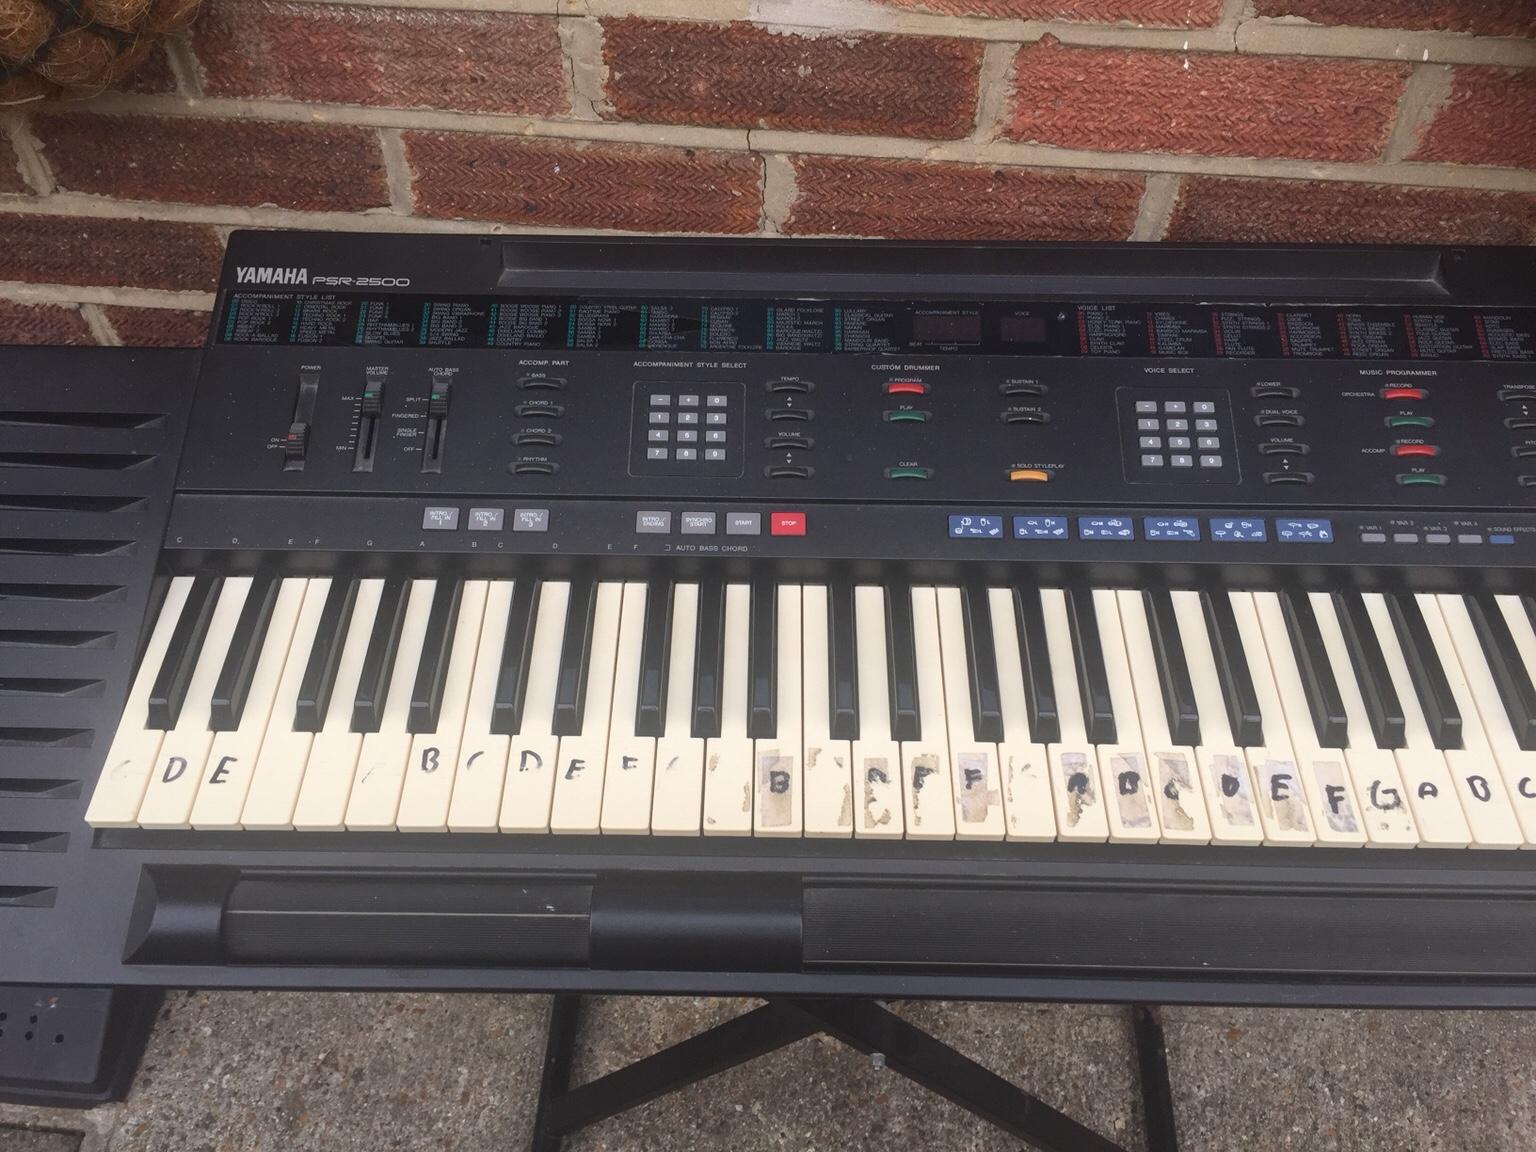 Yamaha electric keyboard in SO16 Southampton for £40.00 for sale | Shpock